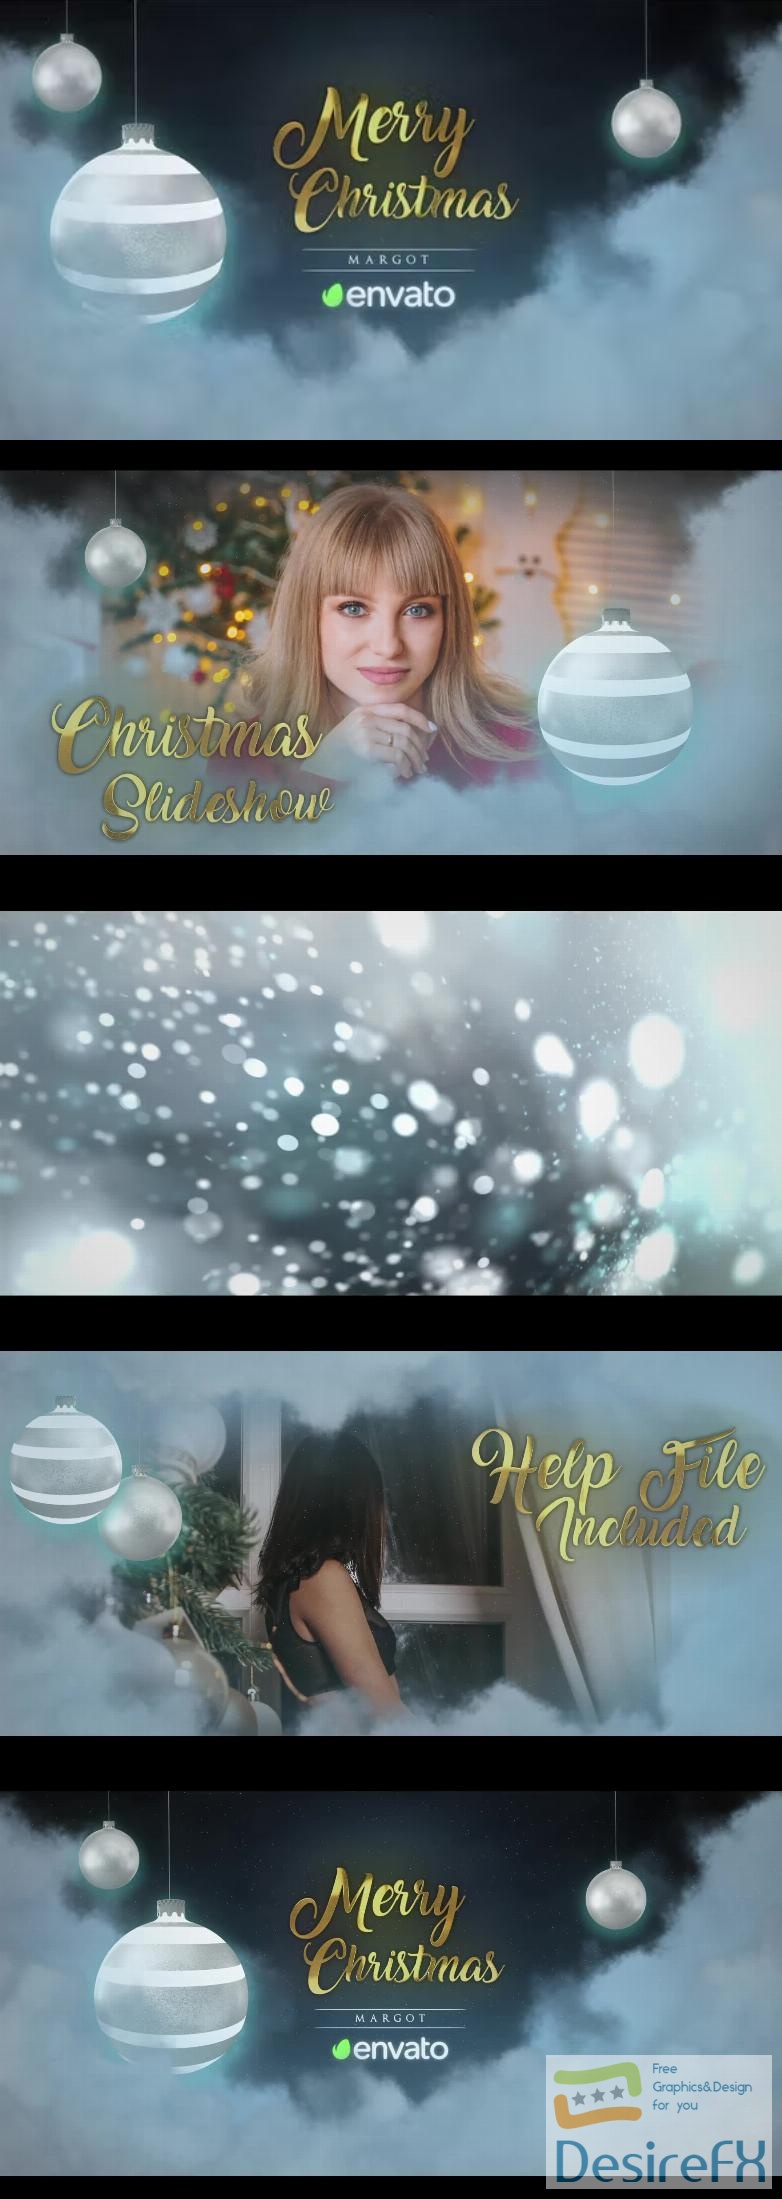 Videohive Clouds Christmas Slideshow 42445703